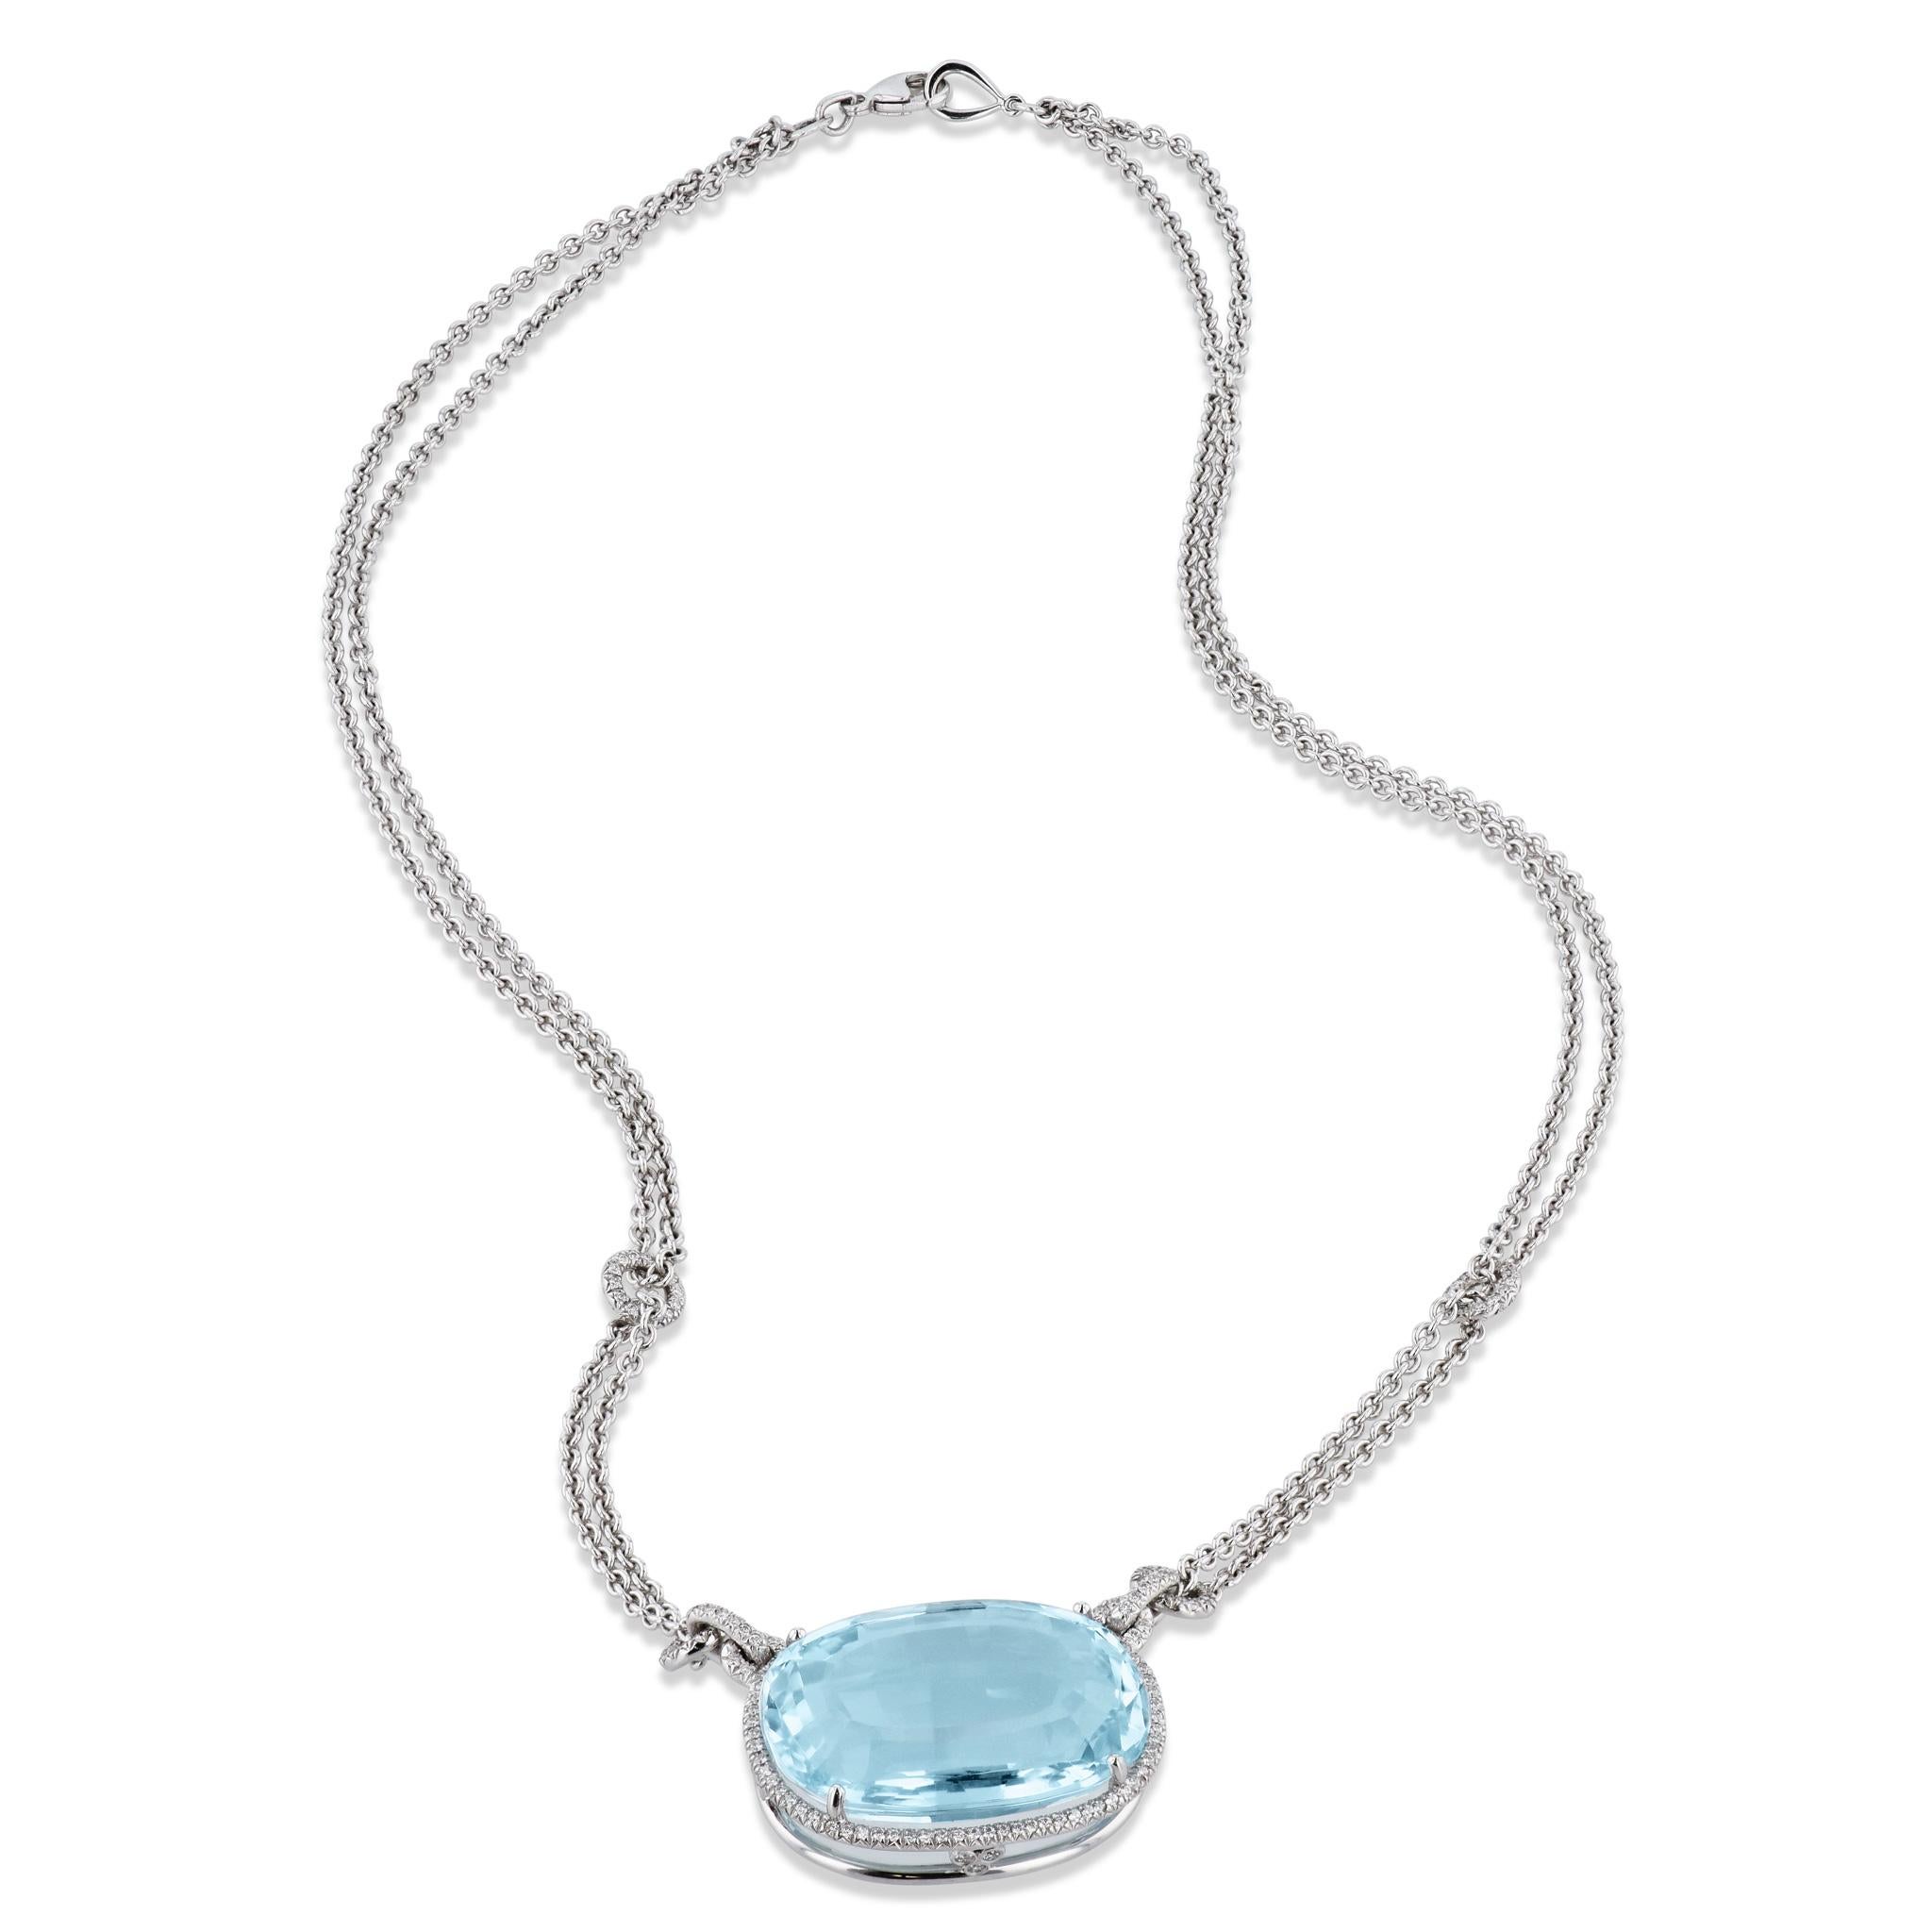 This stunning 18 karat white gold necklace features a 45.60 carat aquamarine surrounded by a halo of diamonds. There are a total of 186 round brilliant cut diamonds with a total weight of 0.56 carats that are H in color and VS1 in clarity. The large